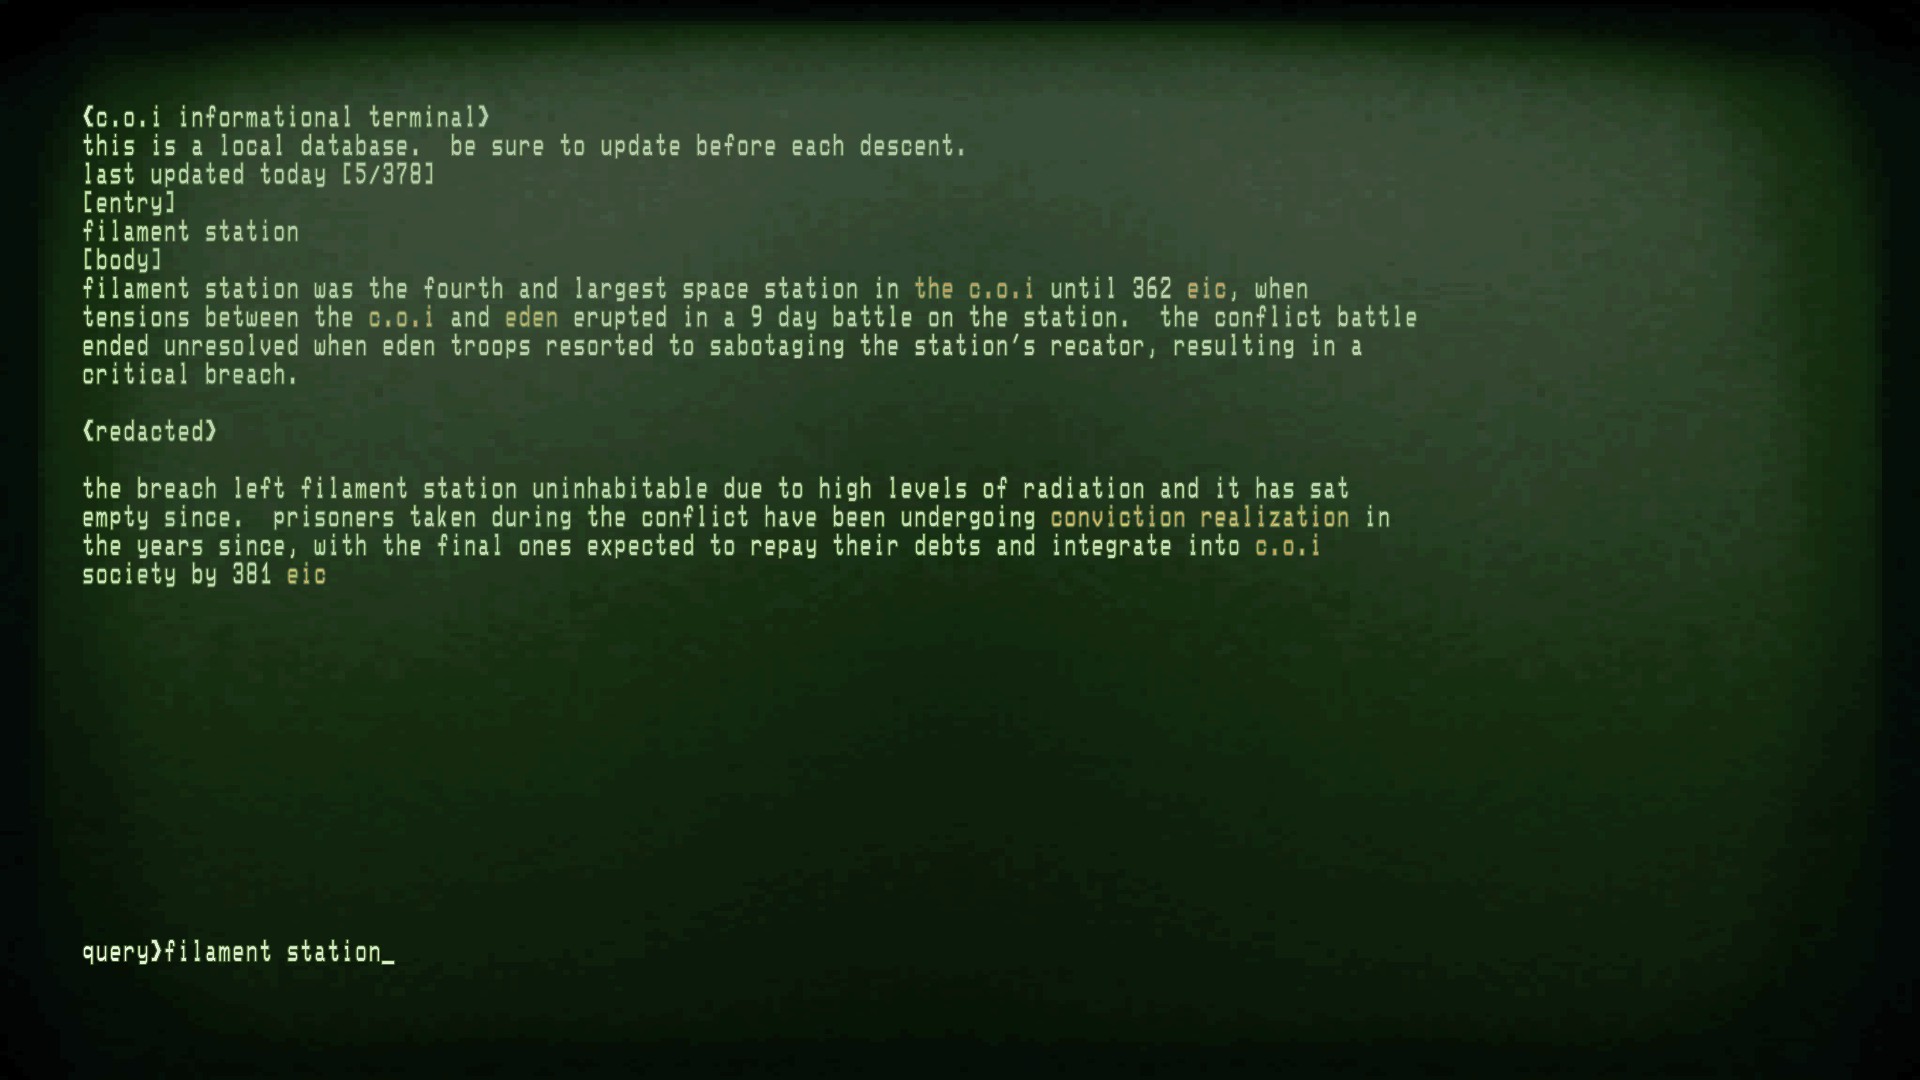 Iron Lung List of All Commands for C.O.I Informational Terminal - Typing 